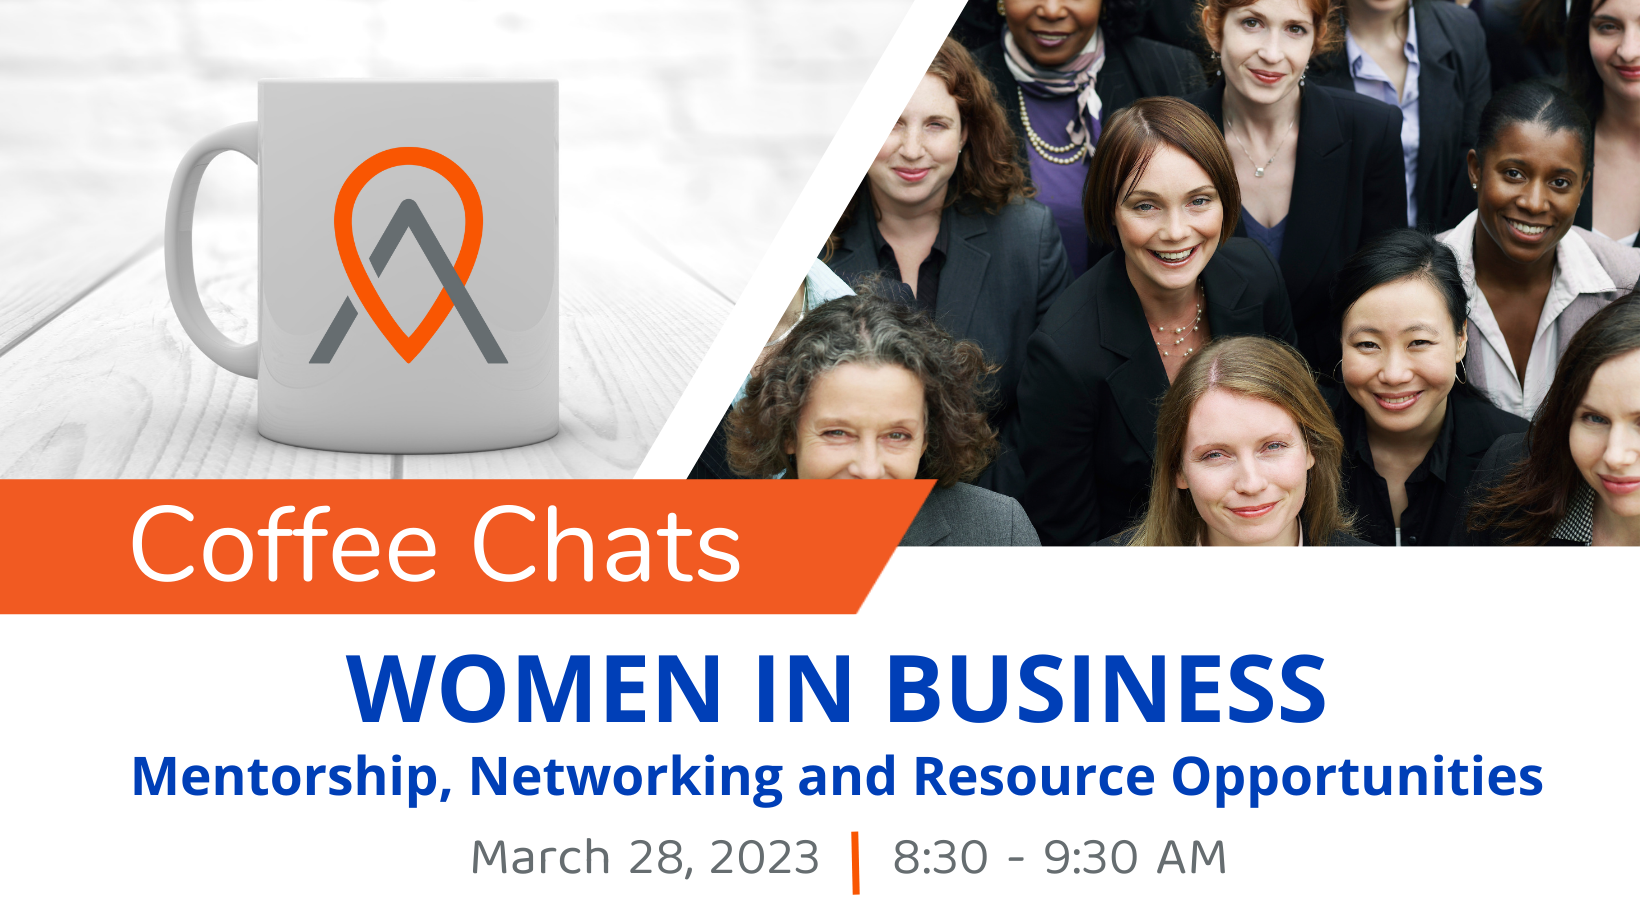 Event Promo Photo For Coffee Chats - Women in Business: Mentorship, Networking and Resource Opportunities